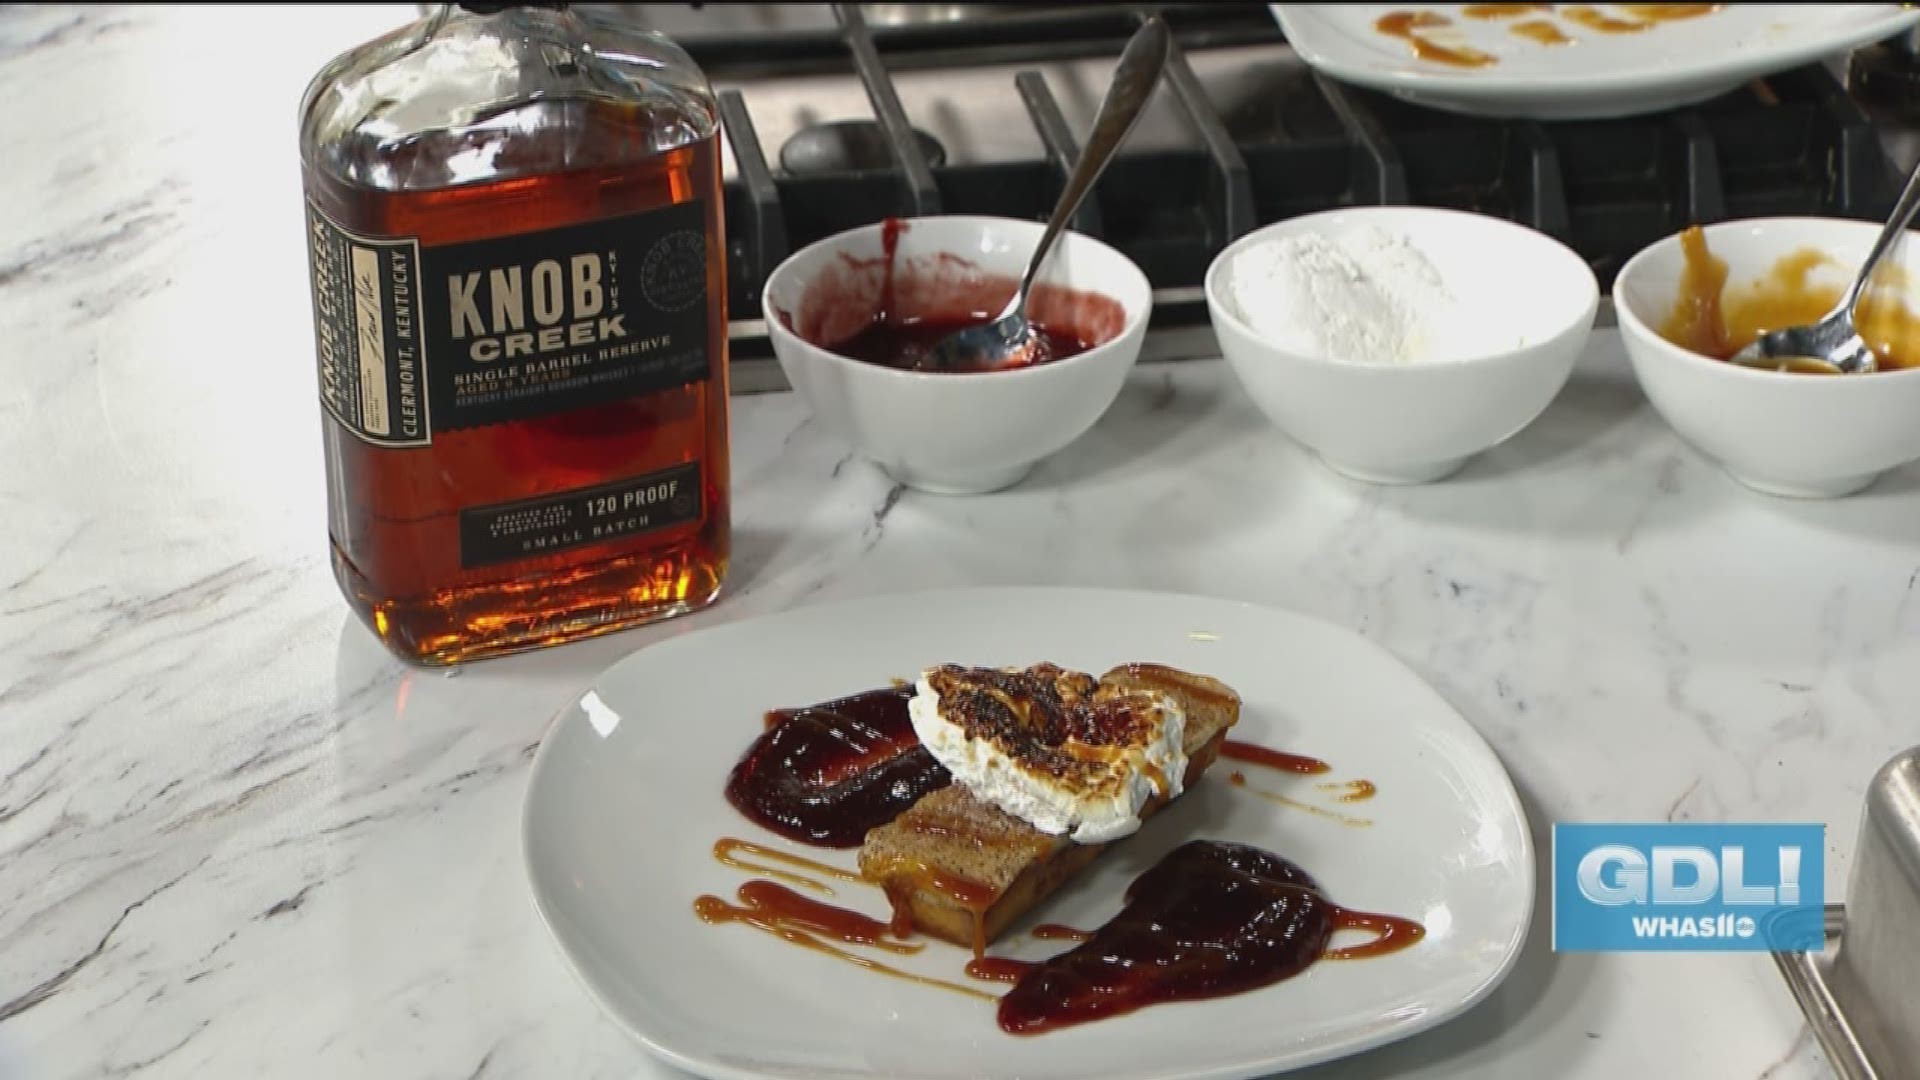 The Knob Creek bourbon dinner at Varanese is Thursday, September 26, 2019 at 2106 Frankfort Avenue in Louisville, KY. Tickets are $60 each and include a reception at 6:30 PM and dinner at 7 PM. For reservations, call 502-899-9904.